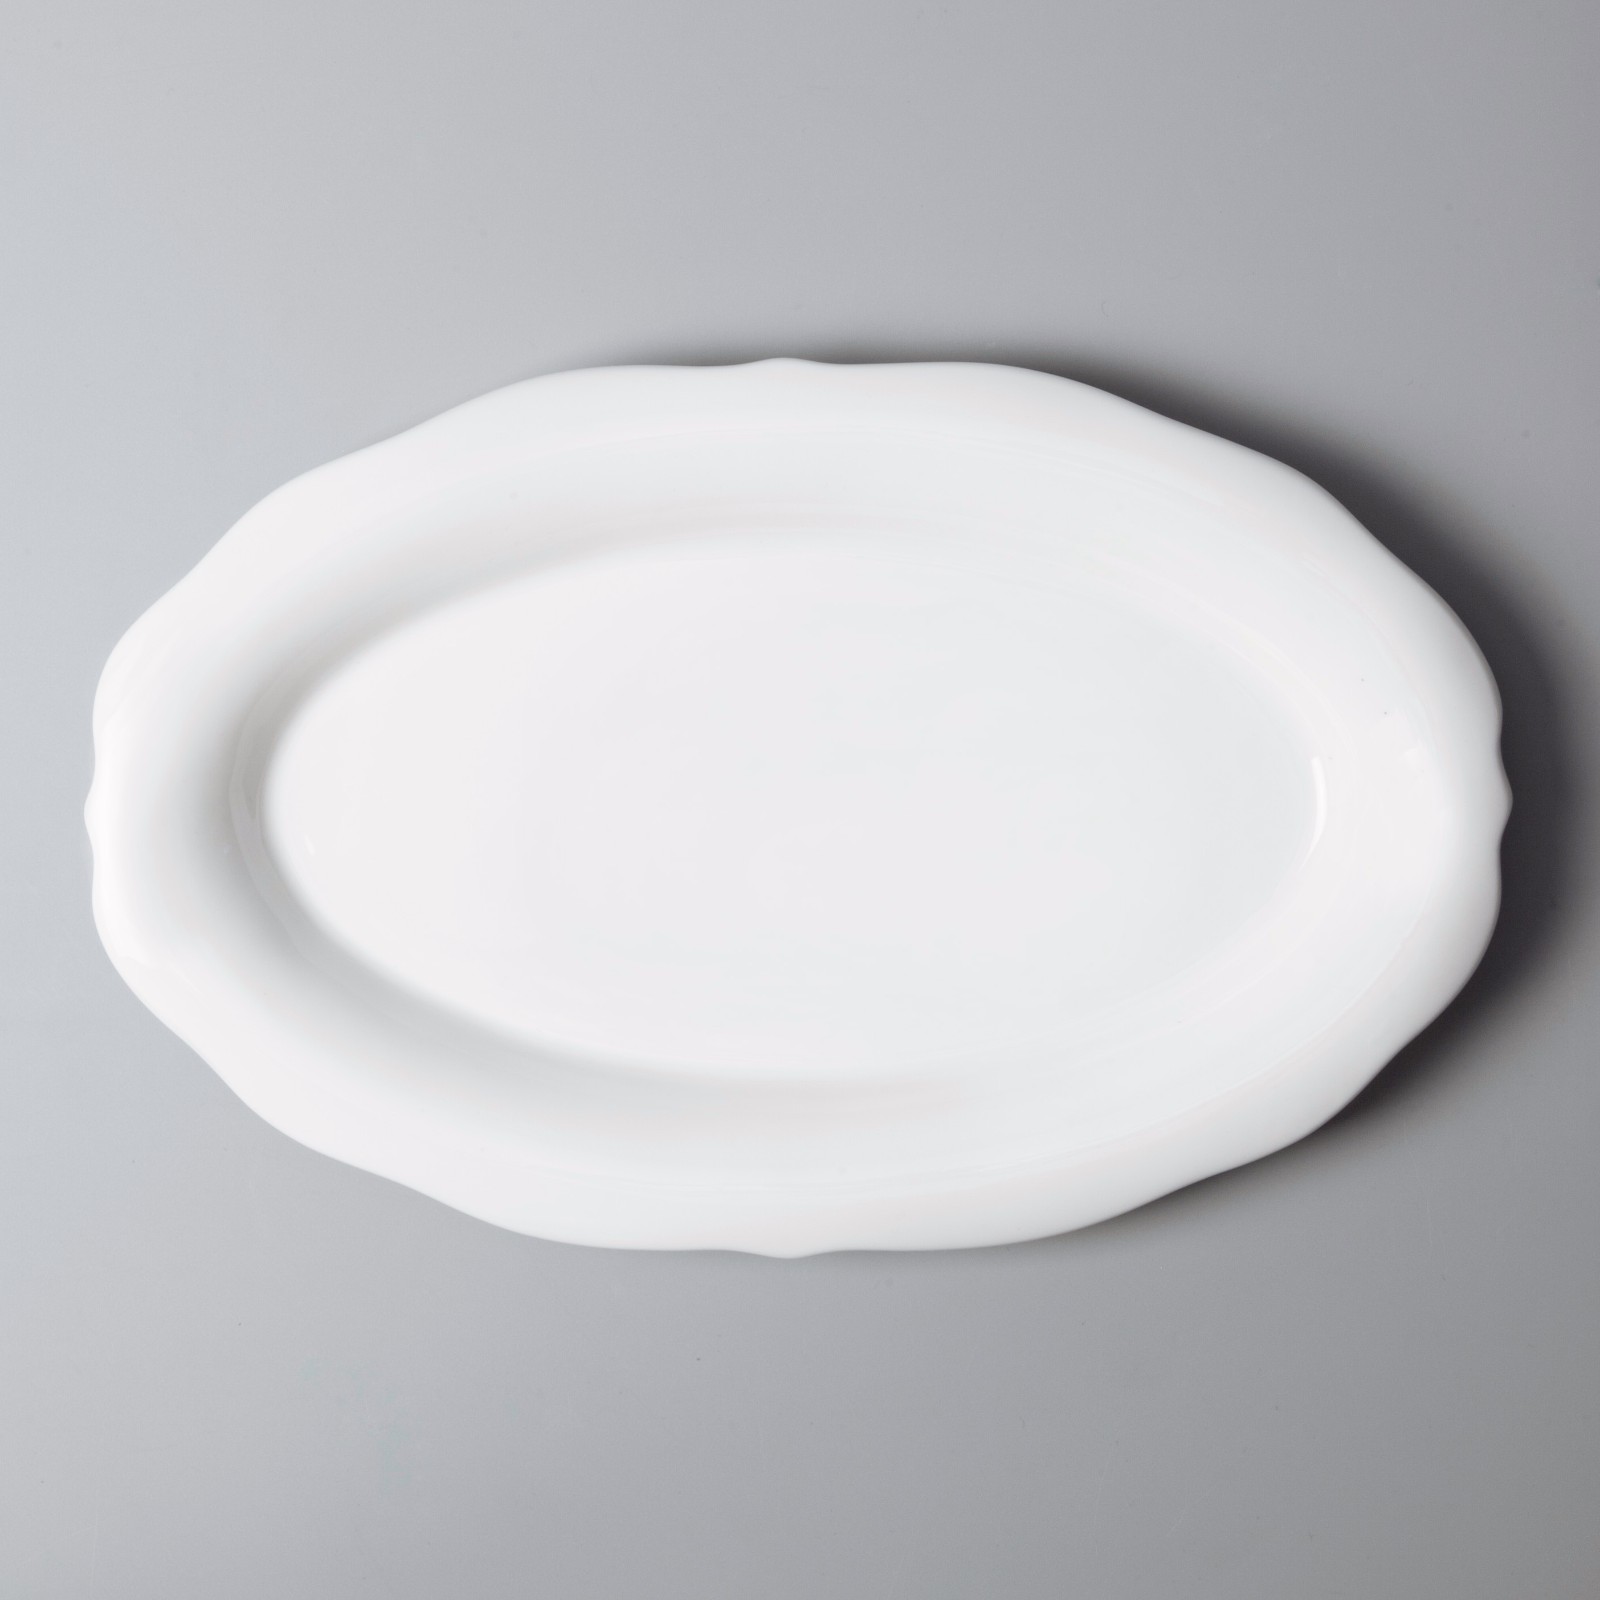 Two Eight sample white dinnerware sets for 8 series for home-4